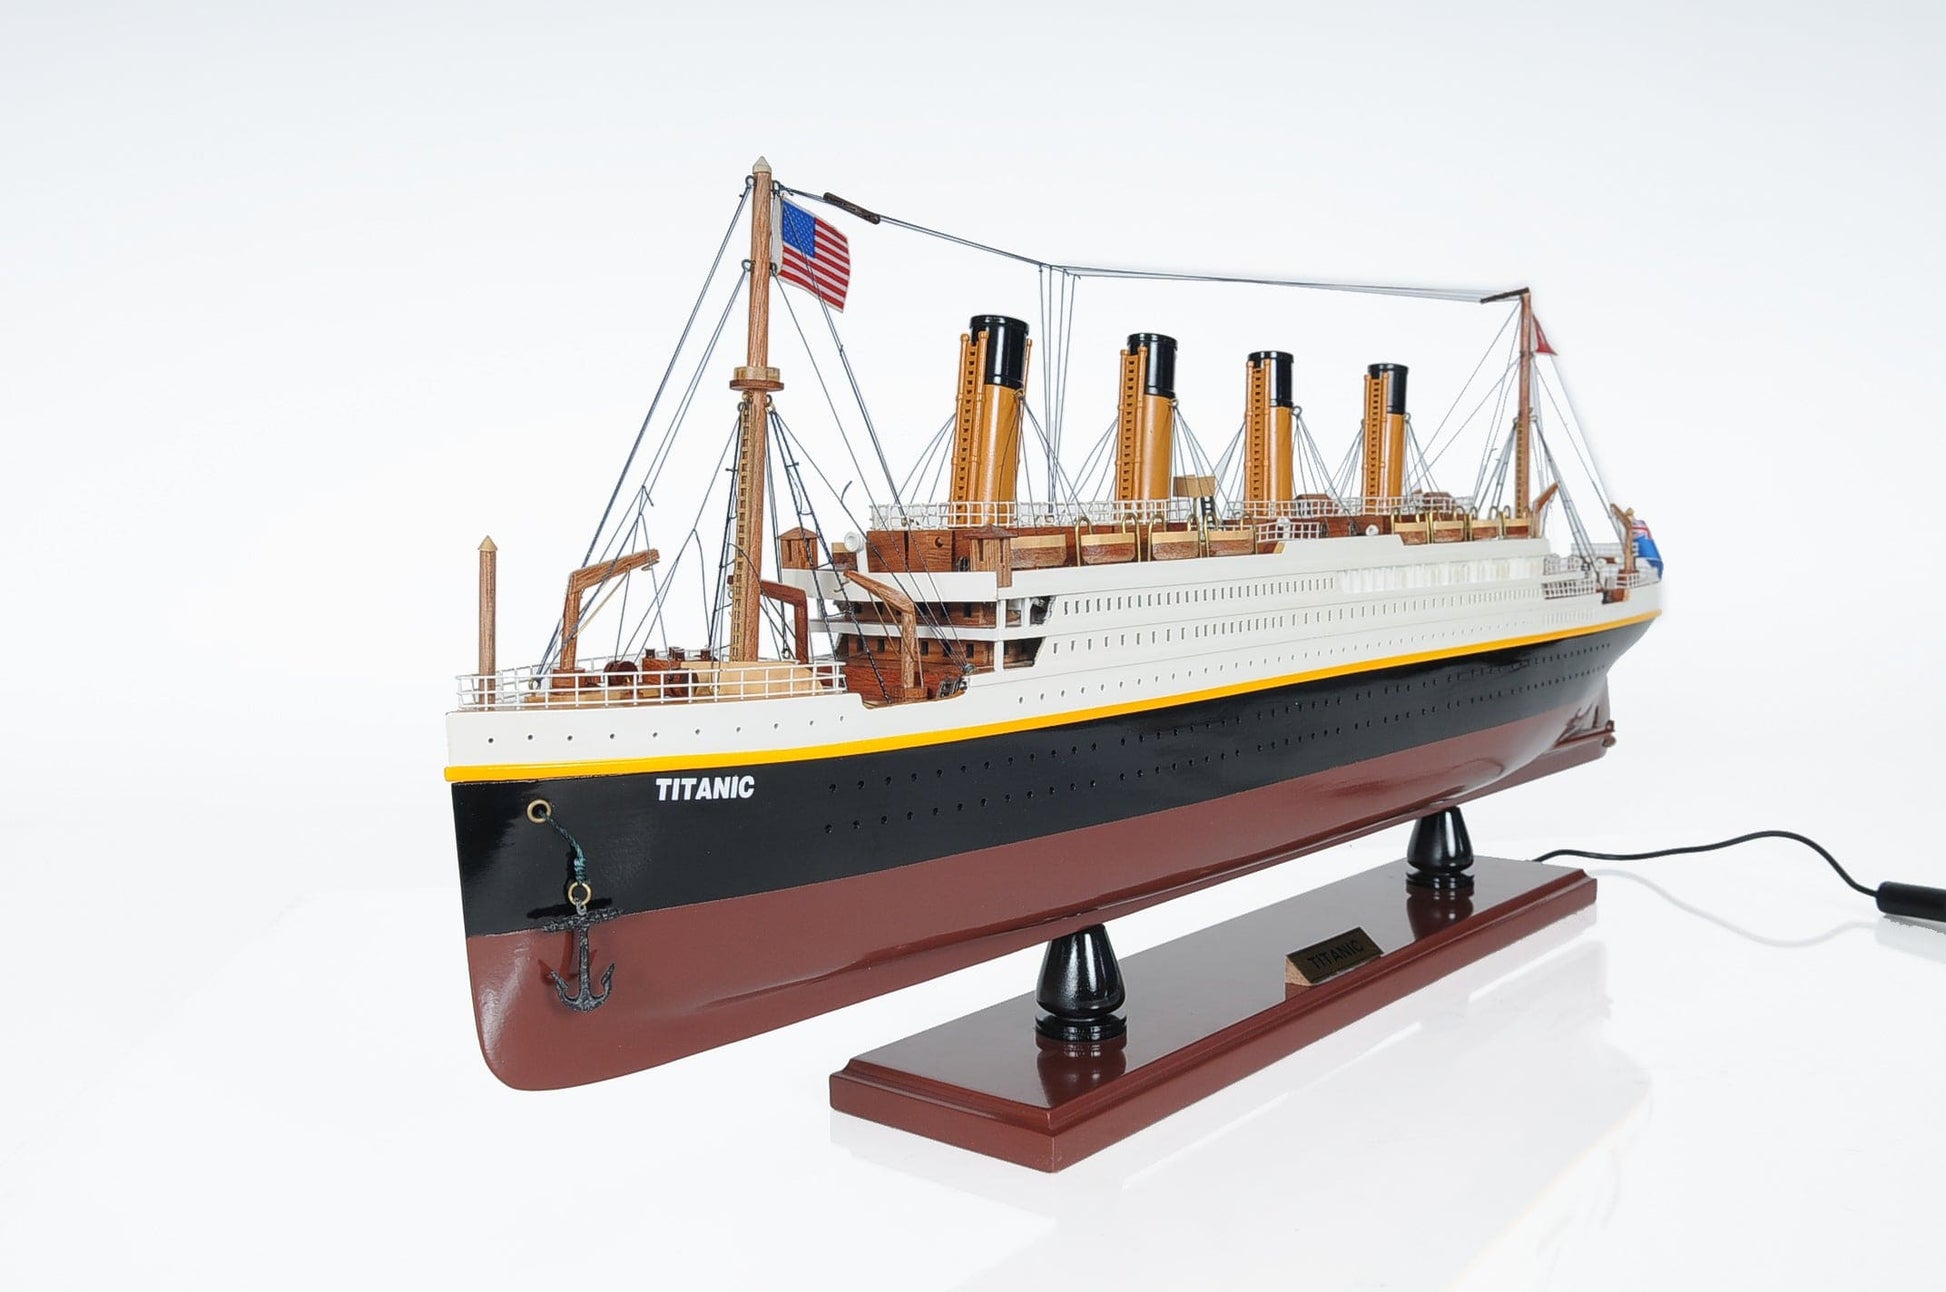 ALDO Hobbies & Creative Arts> Collectibles> Scale Model L: 32 W: 4 H: 13 Inches / NEW / Wood RMS Titanic Painted  Medium With lights Passenger Ship Ocean Liner Wood Model Assembled